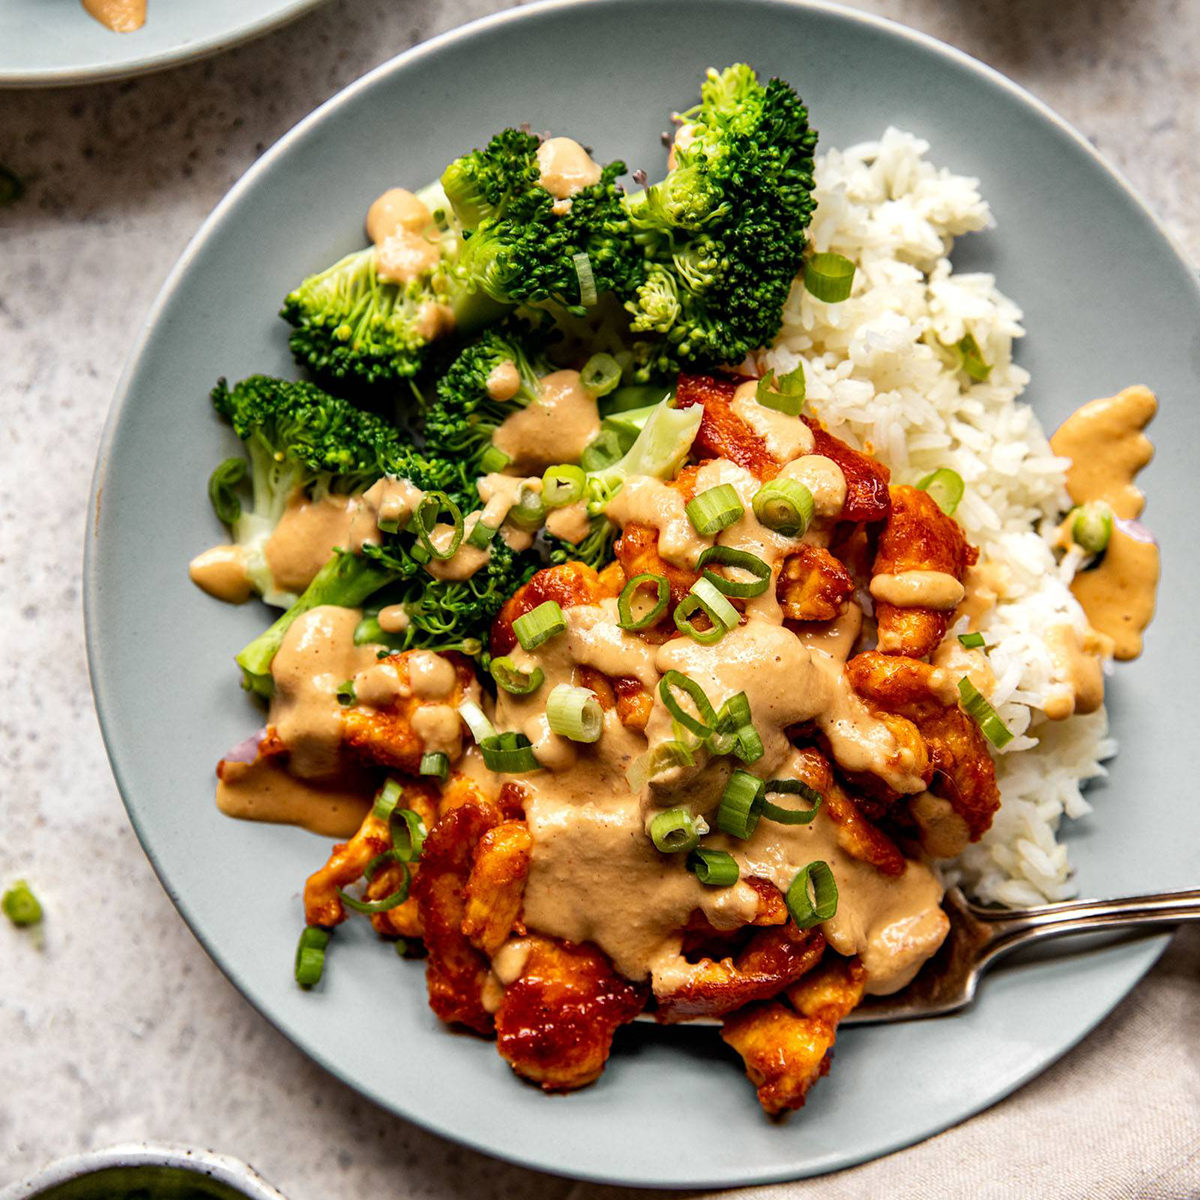 Curry chicken in a bowl with broccoli, rice, and cashew sauce.